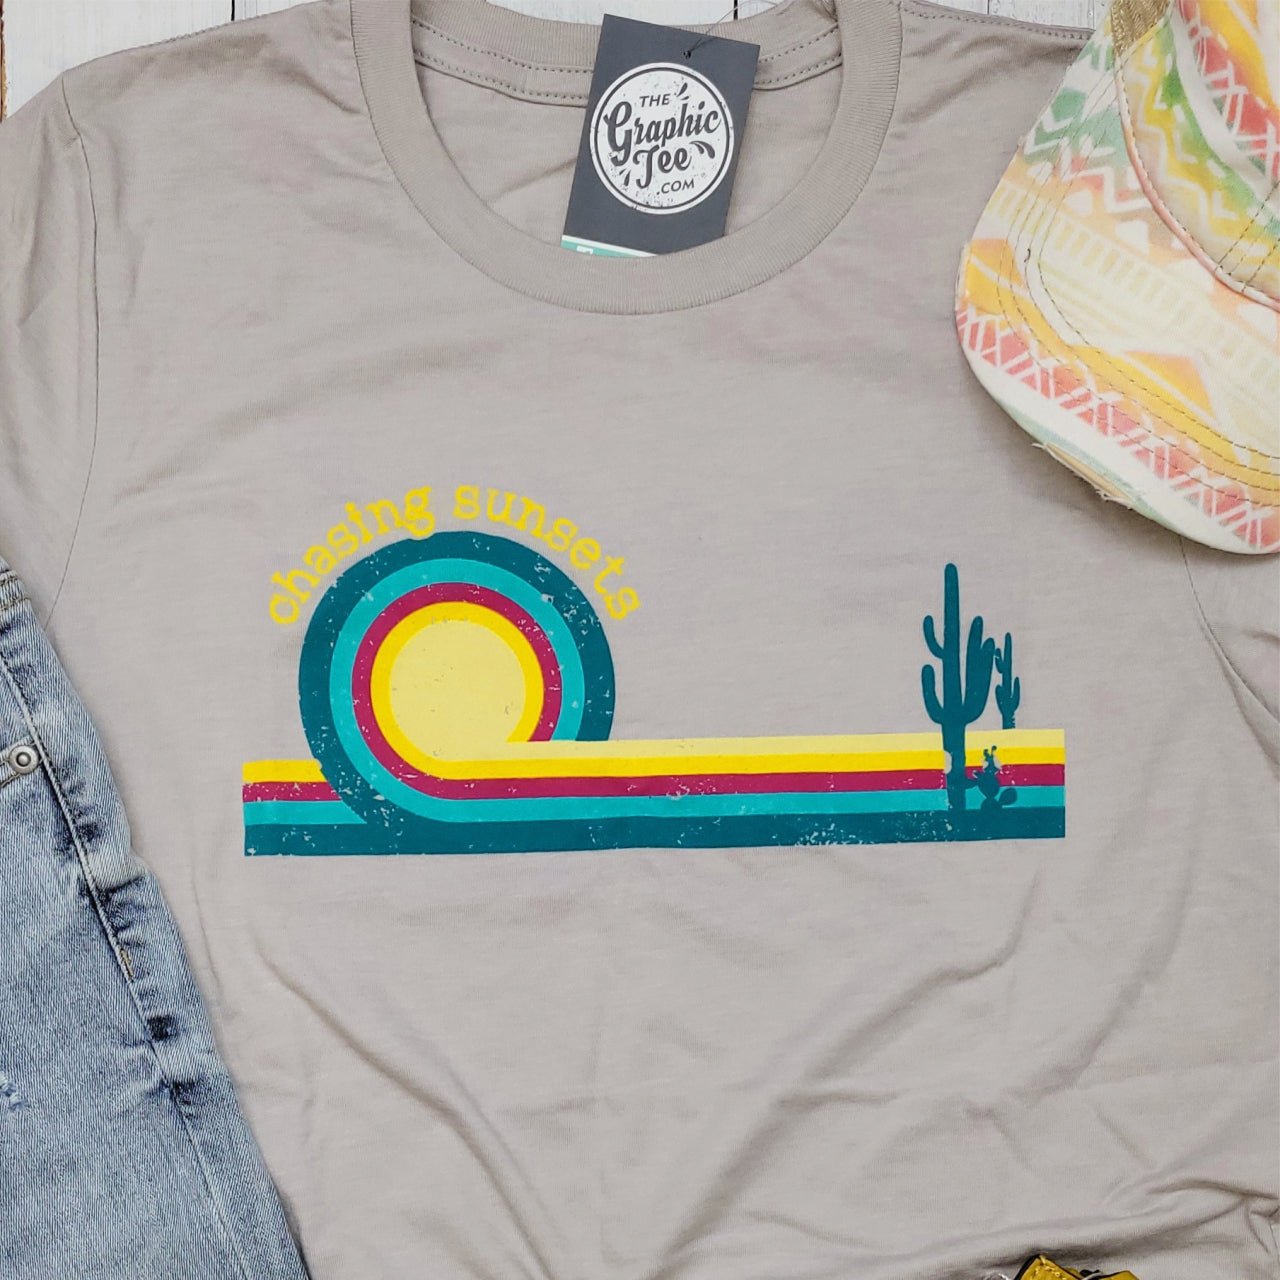 Chasing Sunsets Retro Tee - The Graphic Tee